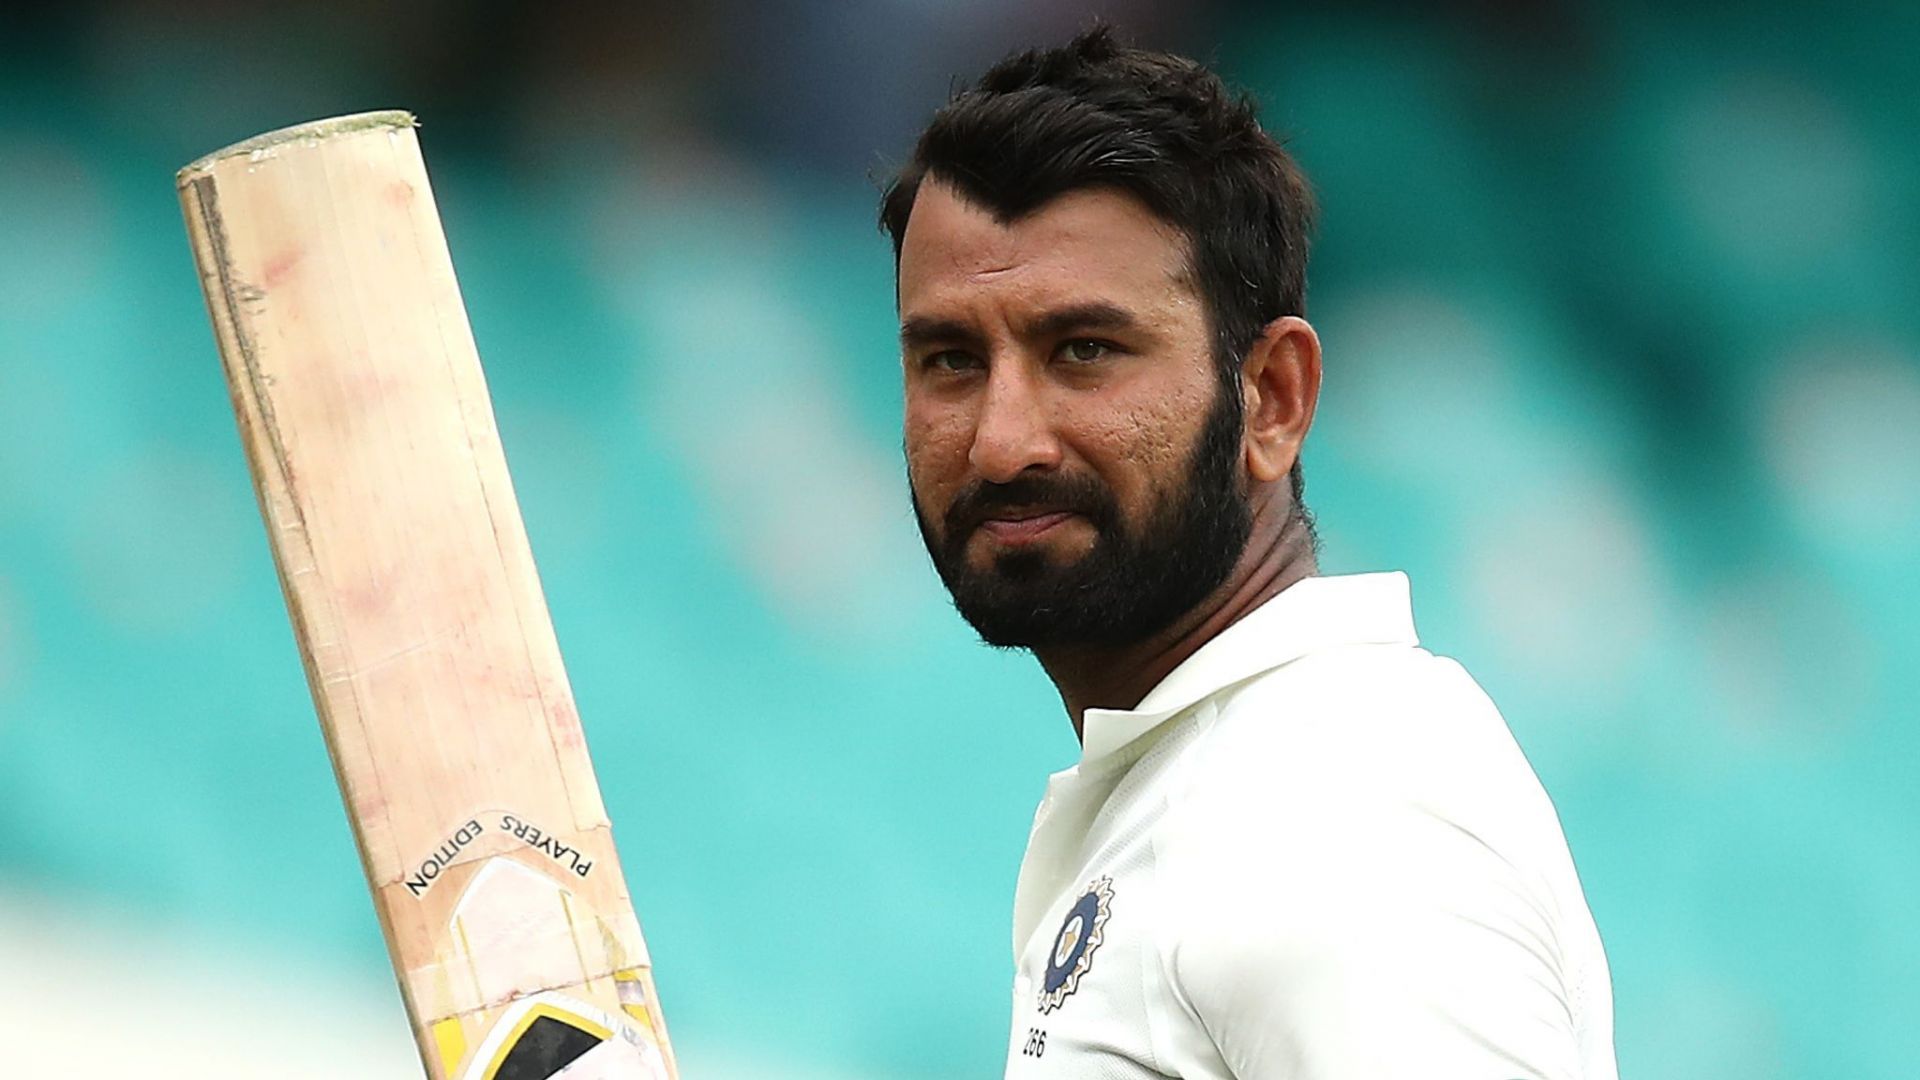 Cheteshwar Pujara has been named in the Indian squad for the fifth Test against England